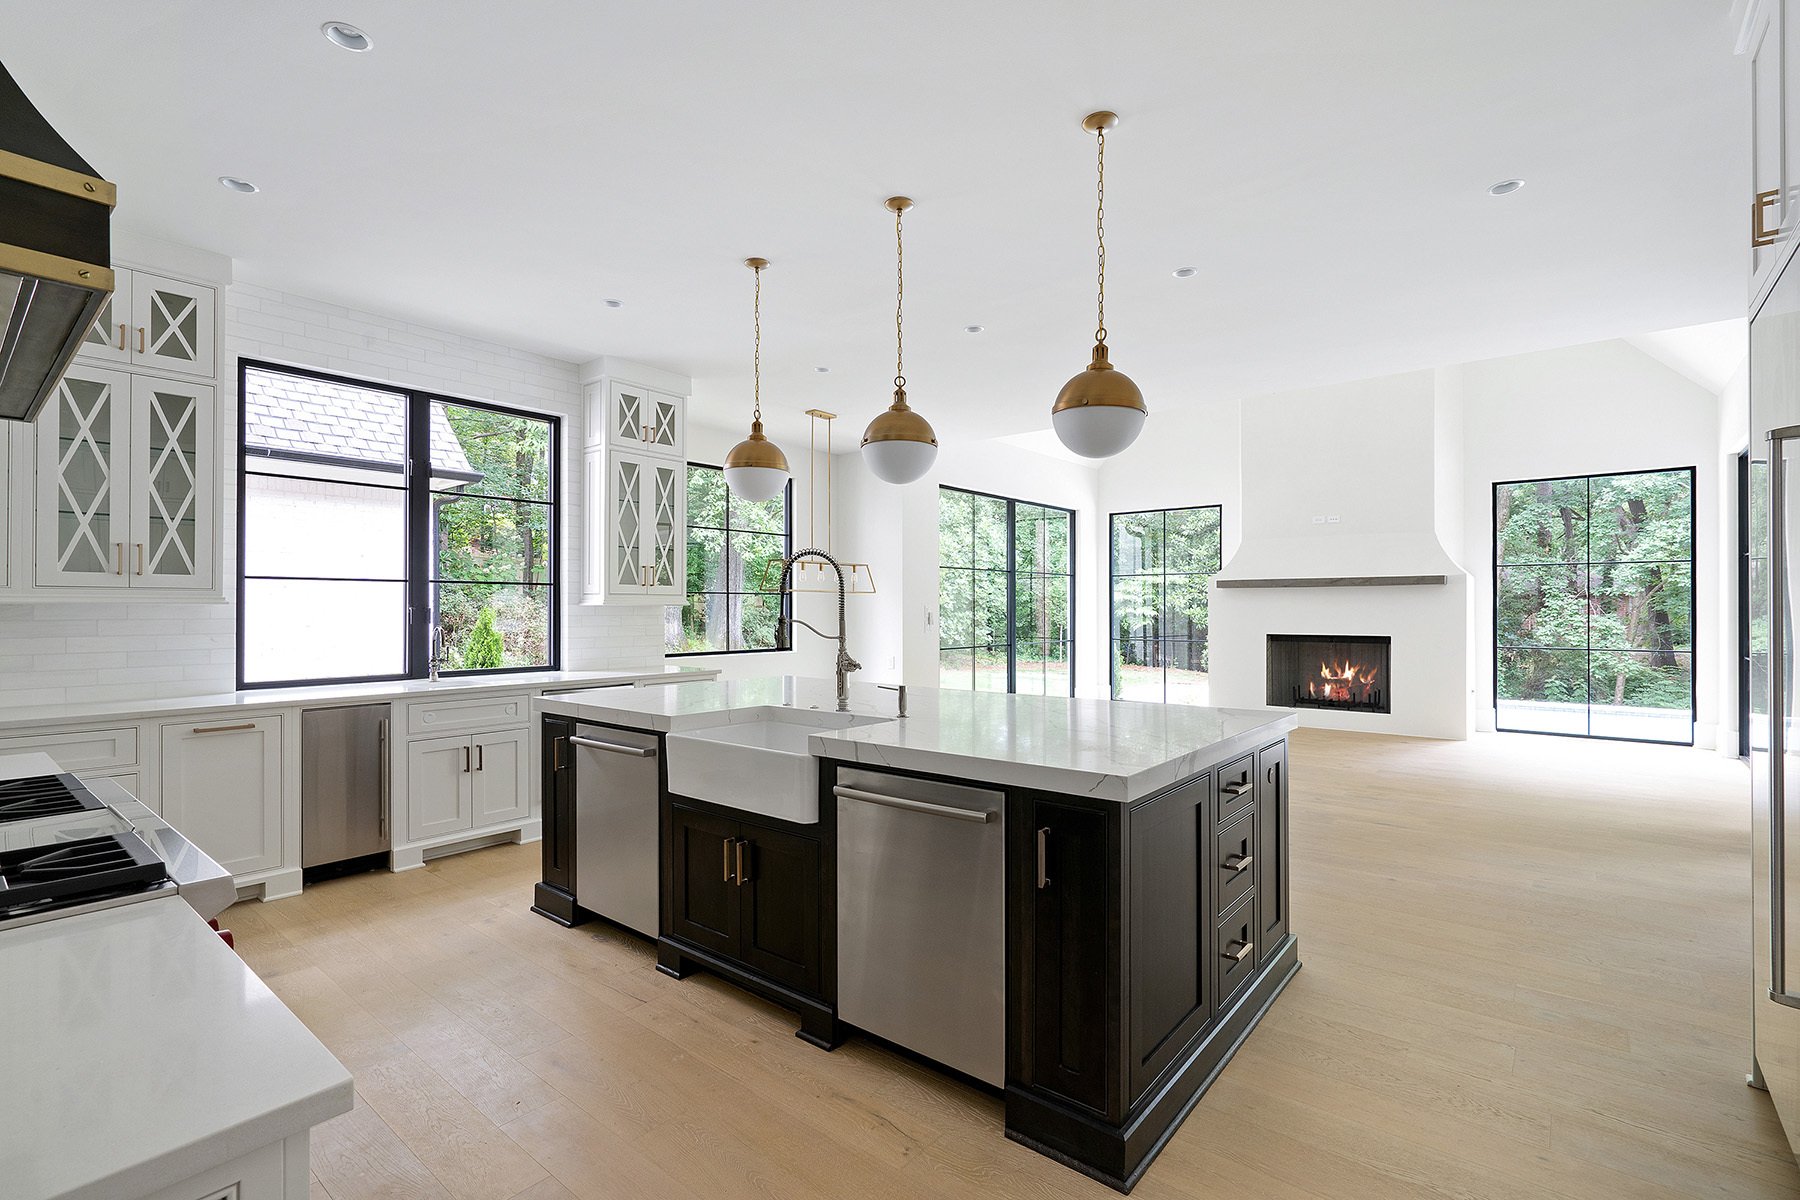 Beautiful black island with white cabinetry featuring a farmhouse sink and stainless steel appliances.